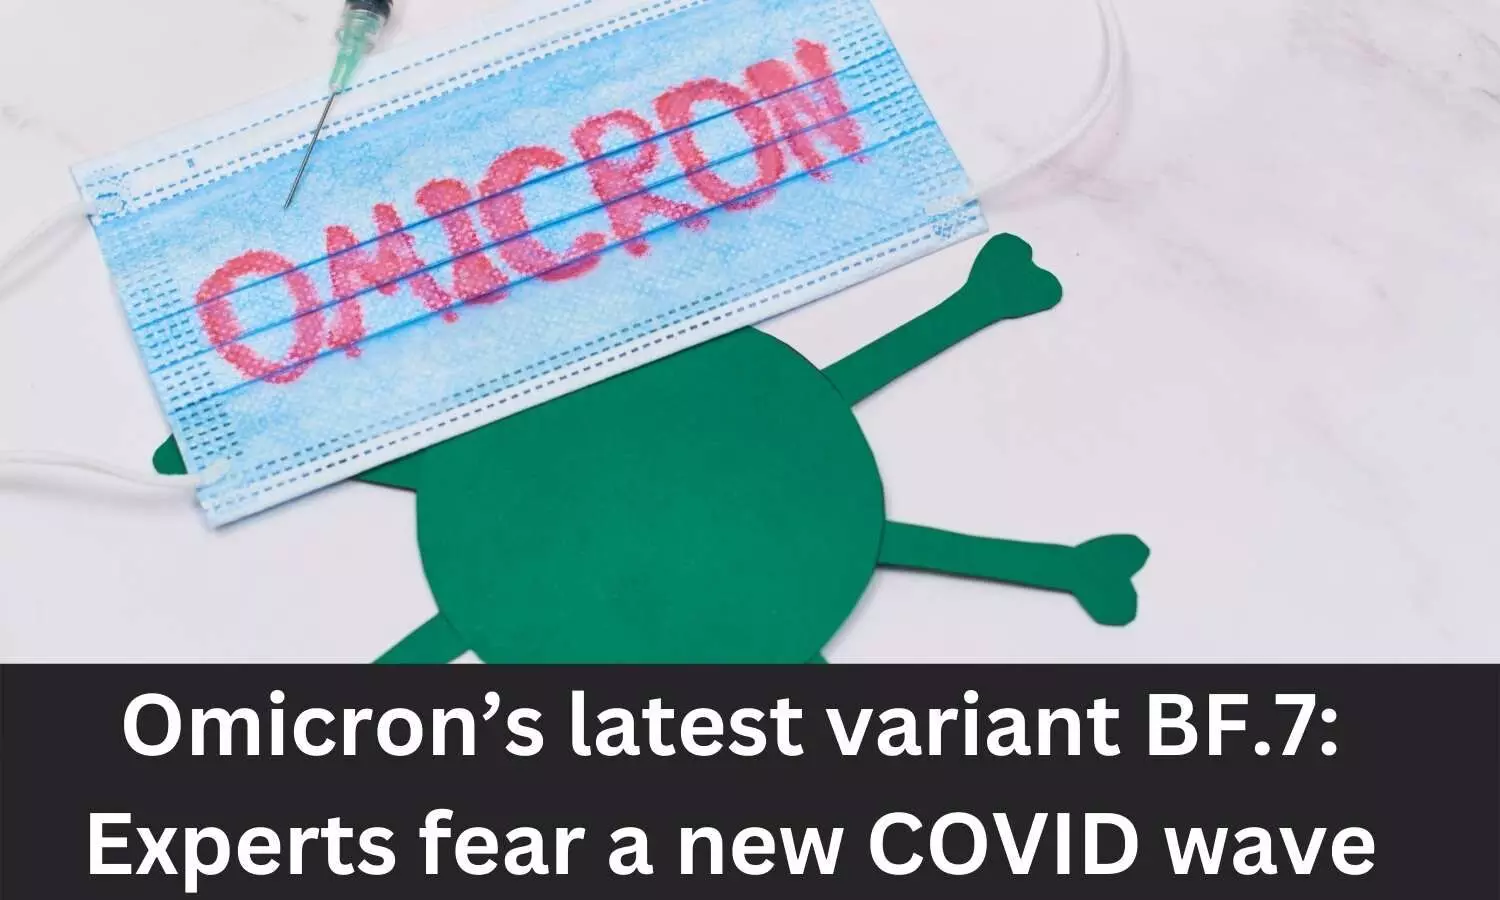 Omicrons latest variant BF.7: Experts fear new COVID wave